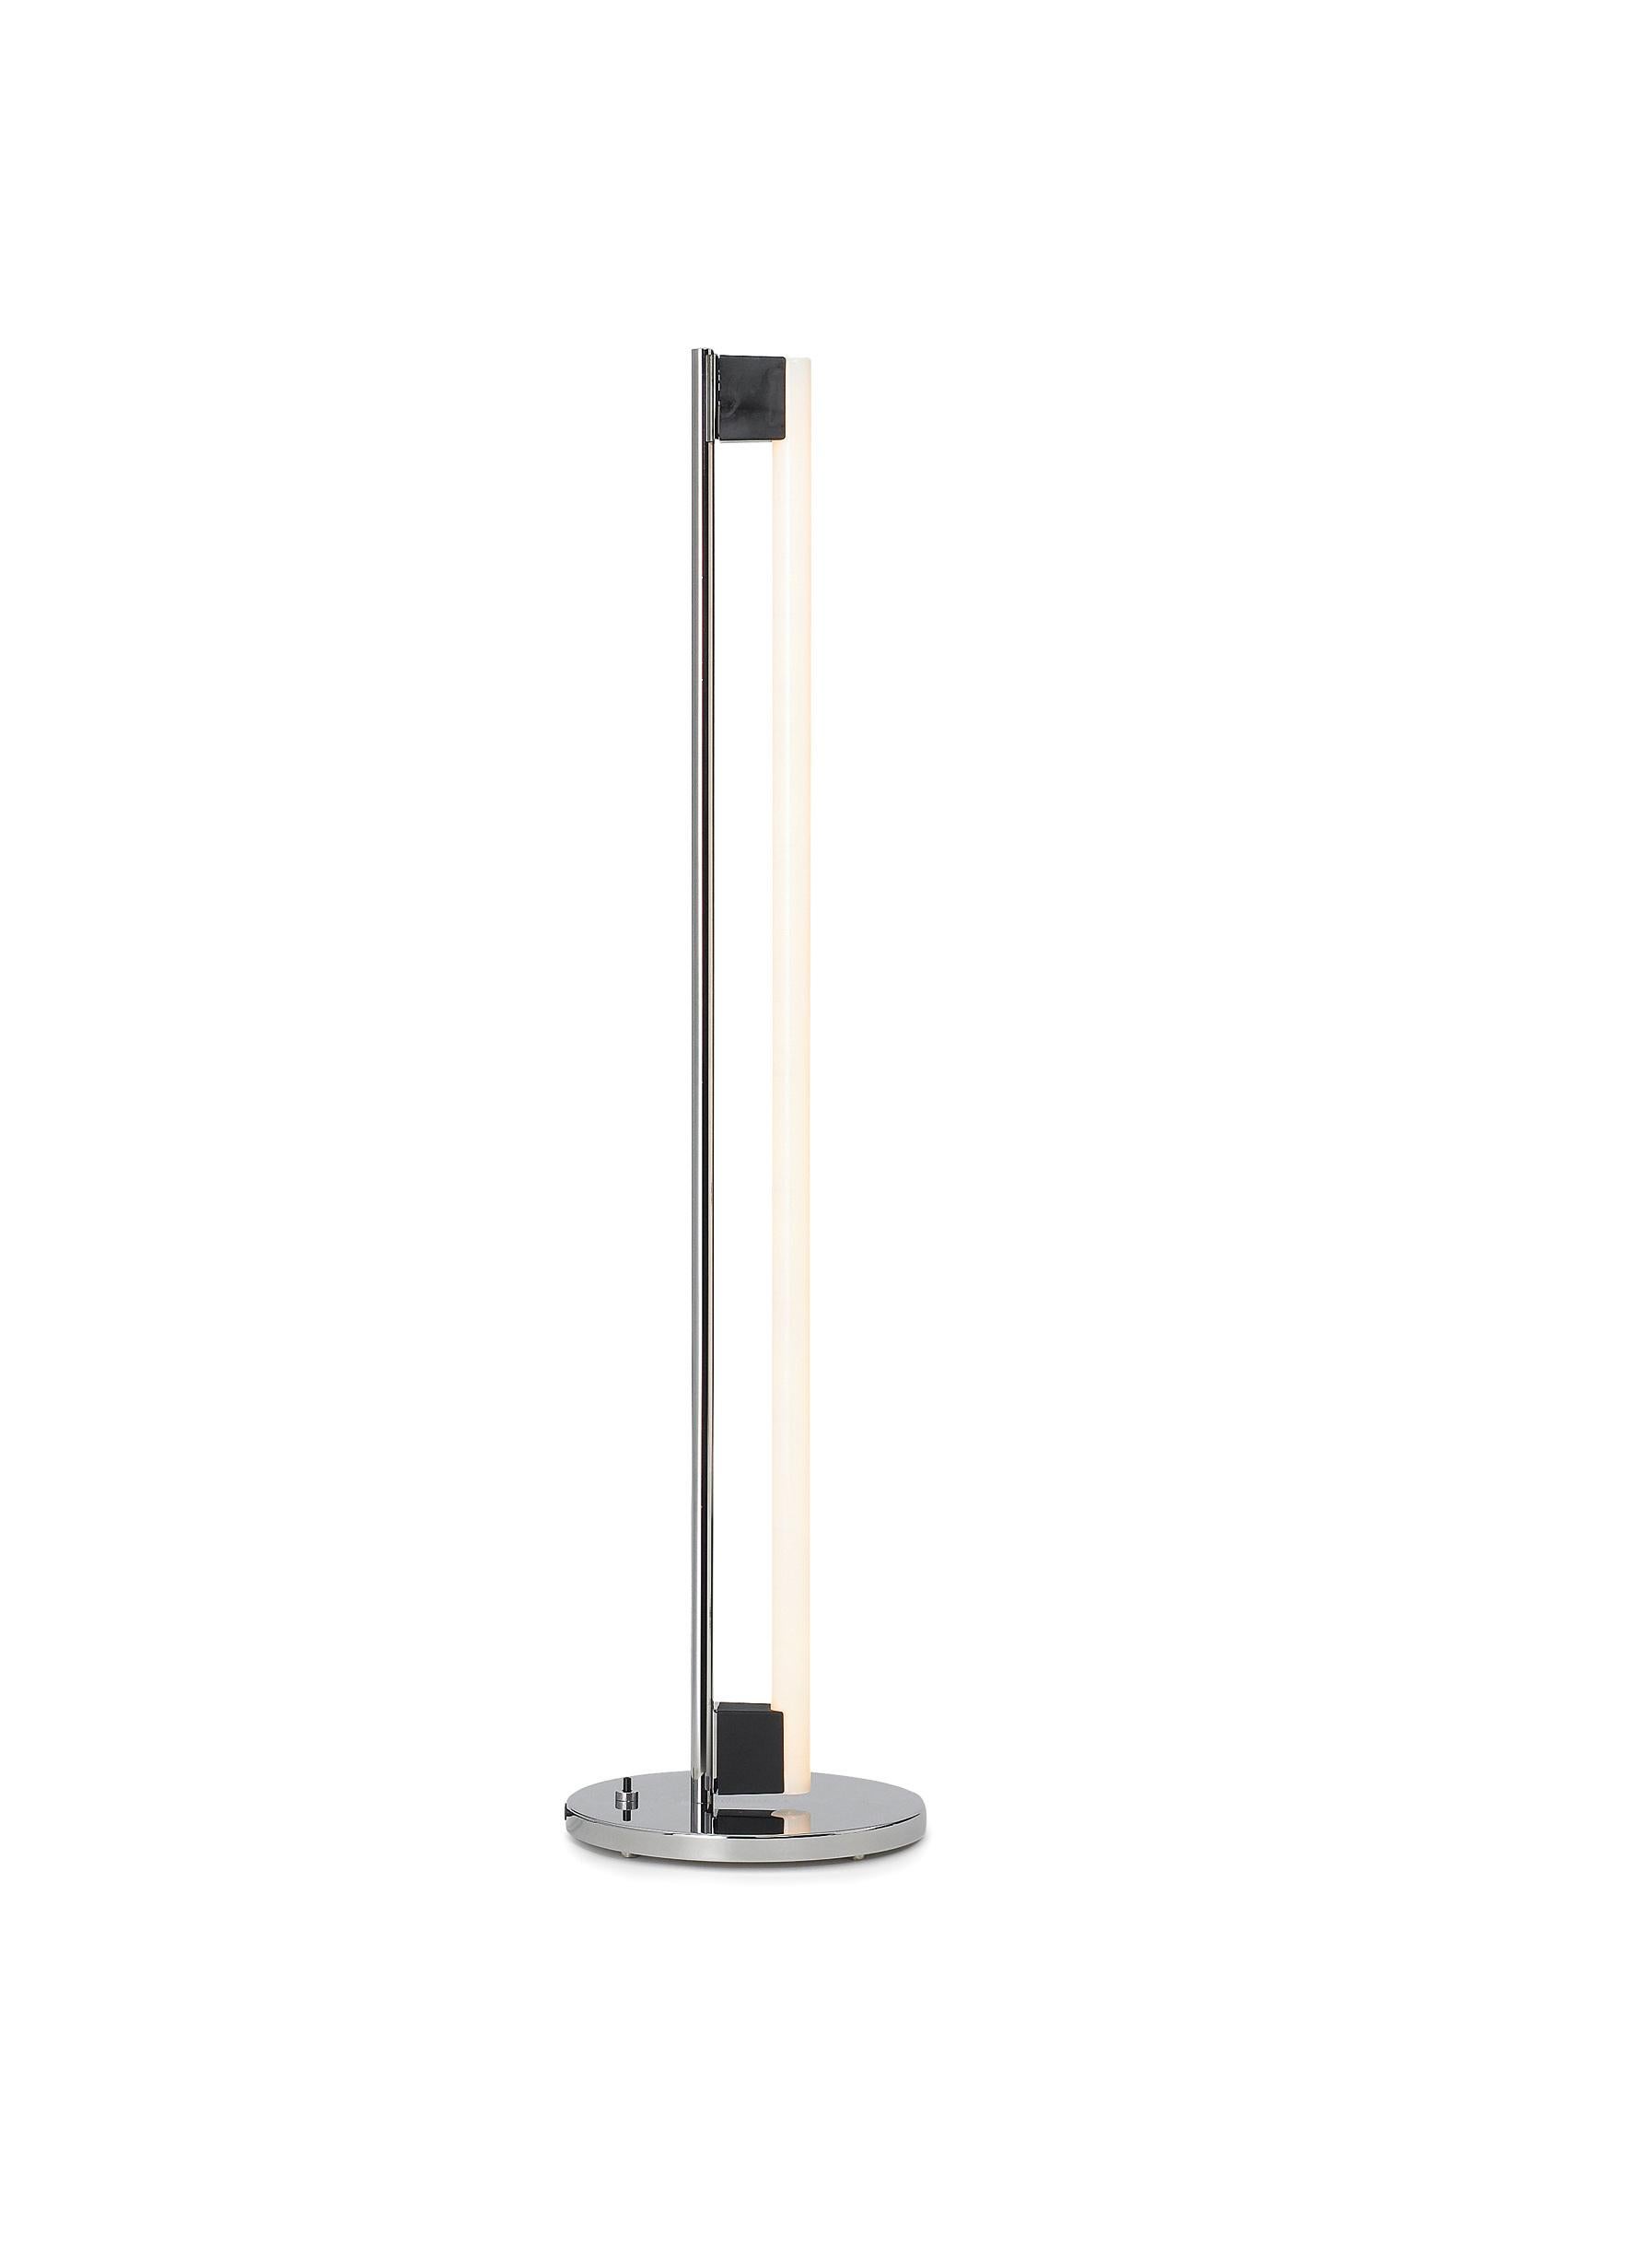 Floor lamp by Eileen Gray. Chrome-plated tubular steel with black plastic lamp socket for mounting light source. Floor plate chrome-plated metal with push-button switch. Felt gliders. Light tube included.

Light tube:
LED linear lamp 13.5 W / 110